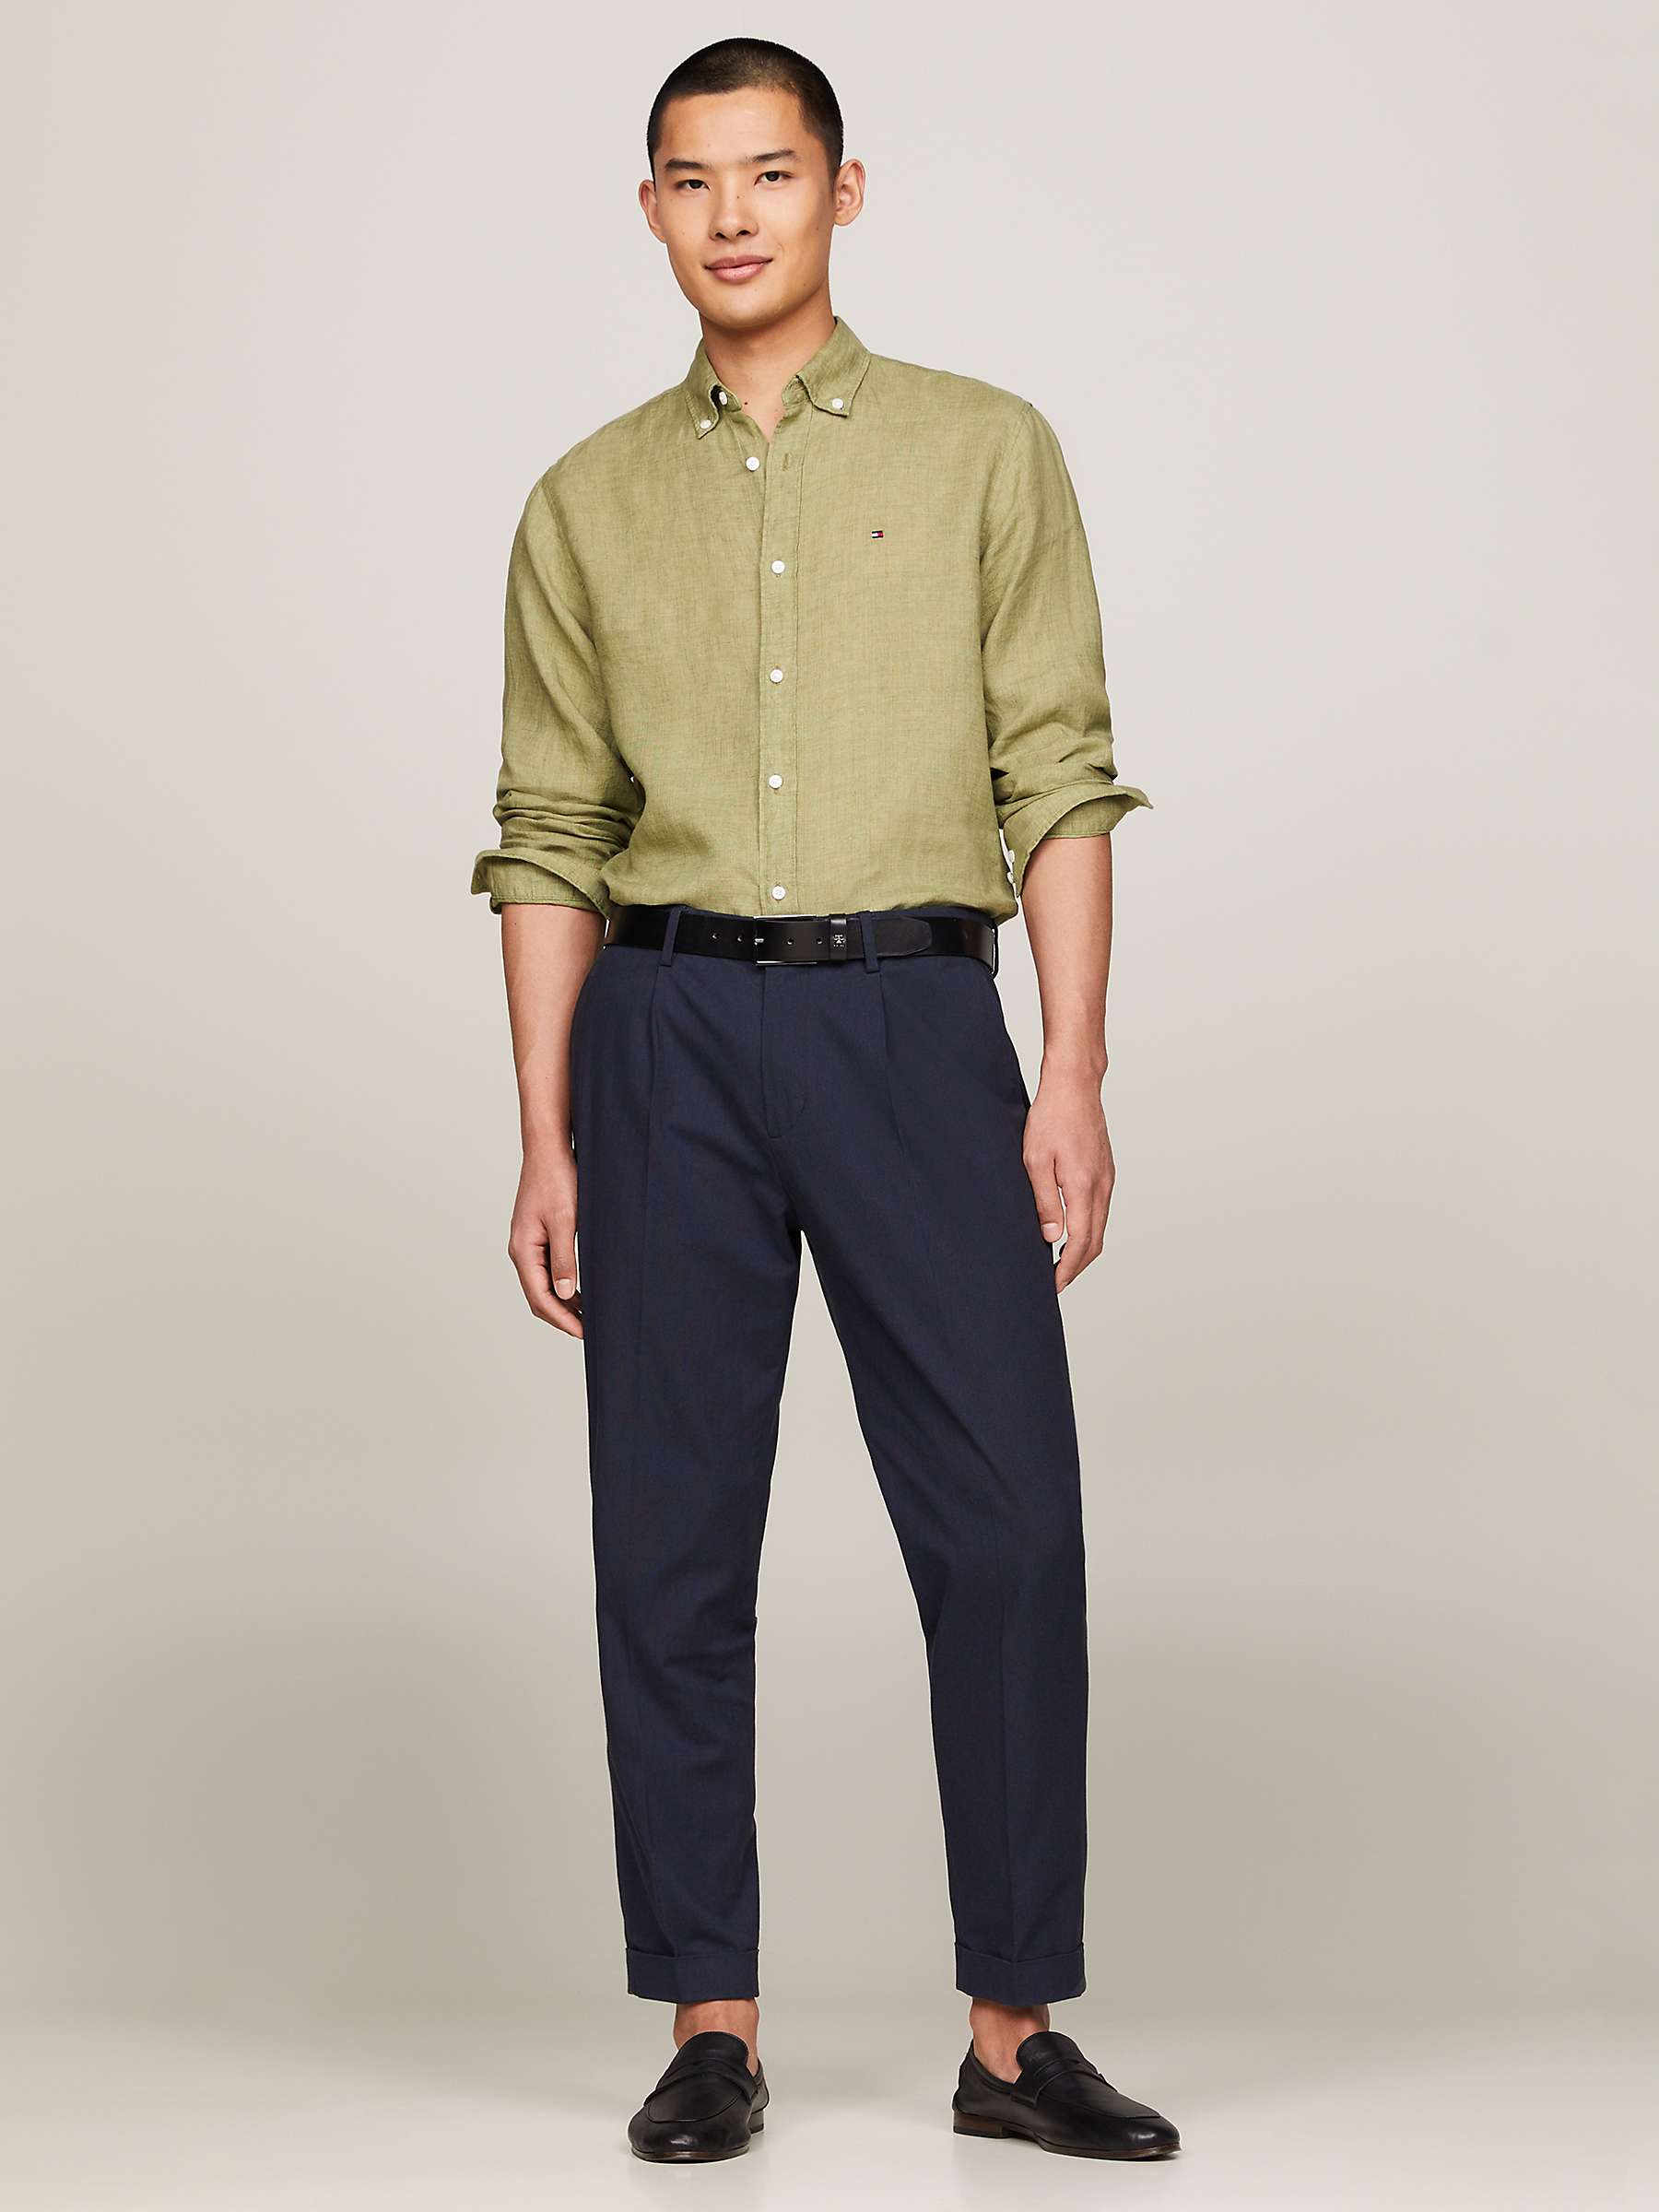 Buy Tommy Hilfiger Pigment Dyed Long Sleeve Shirt Online at johnlewis.com